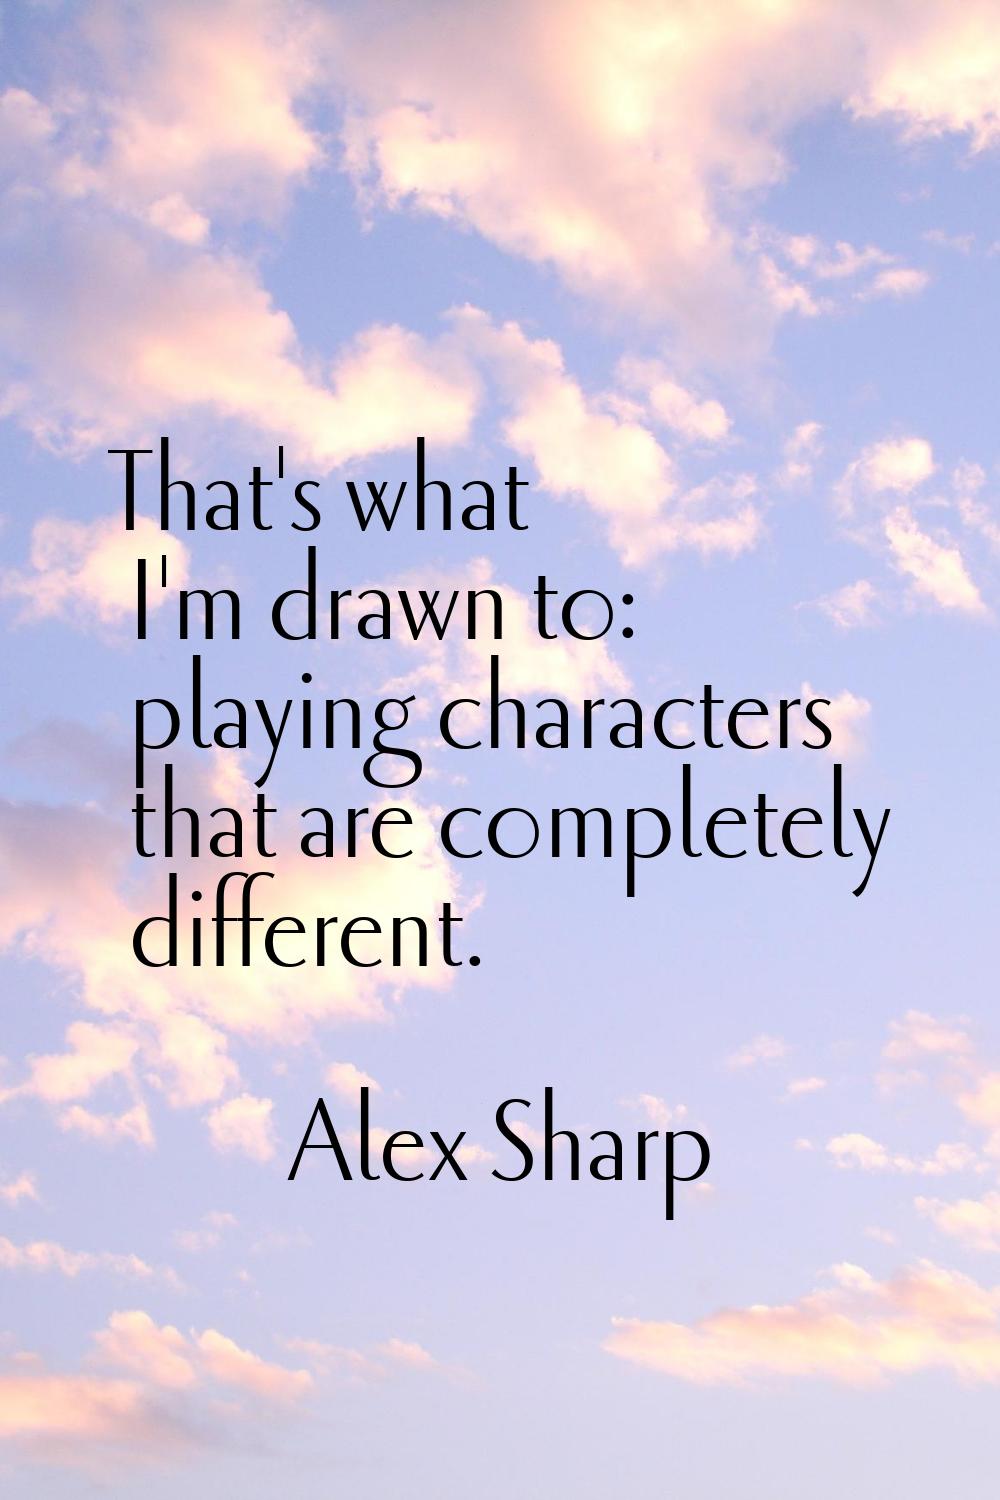 That's what I'm drawn to: playing characters that are completely different.